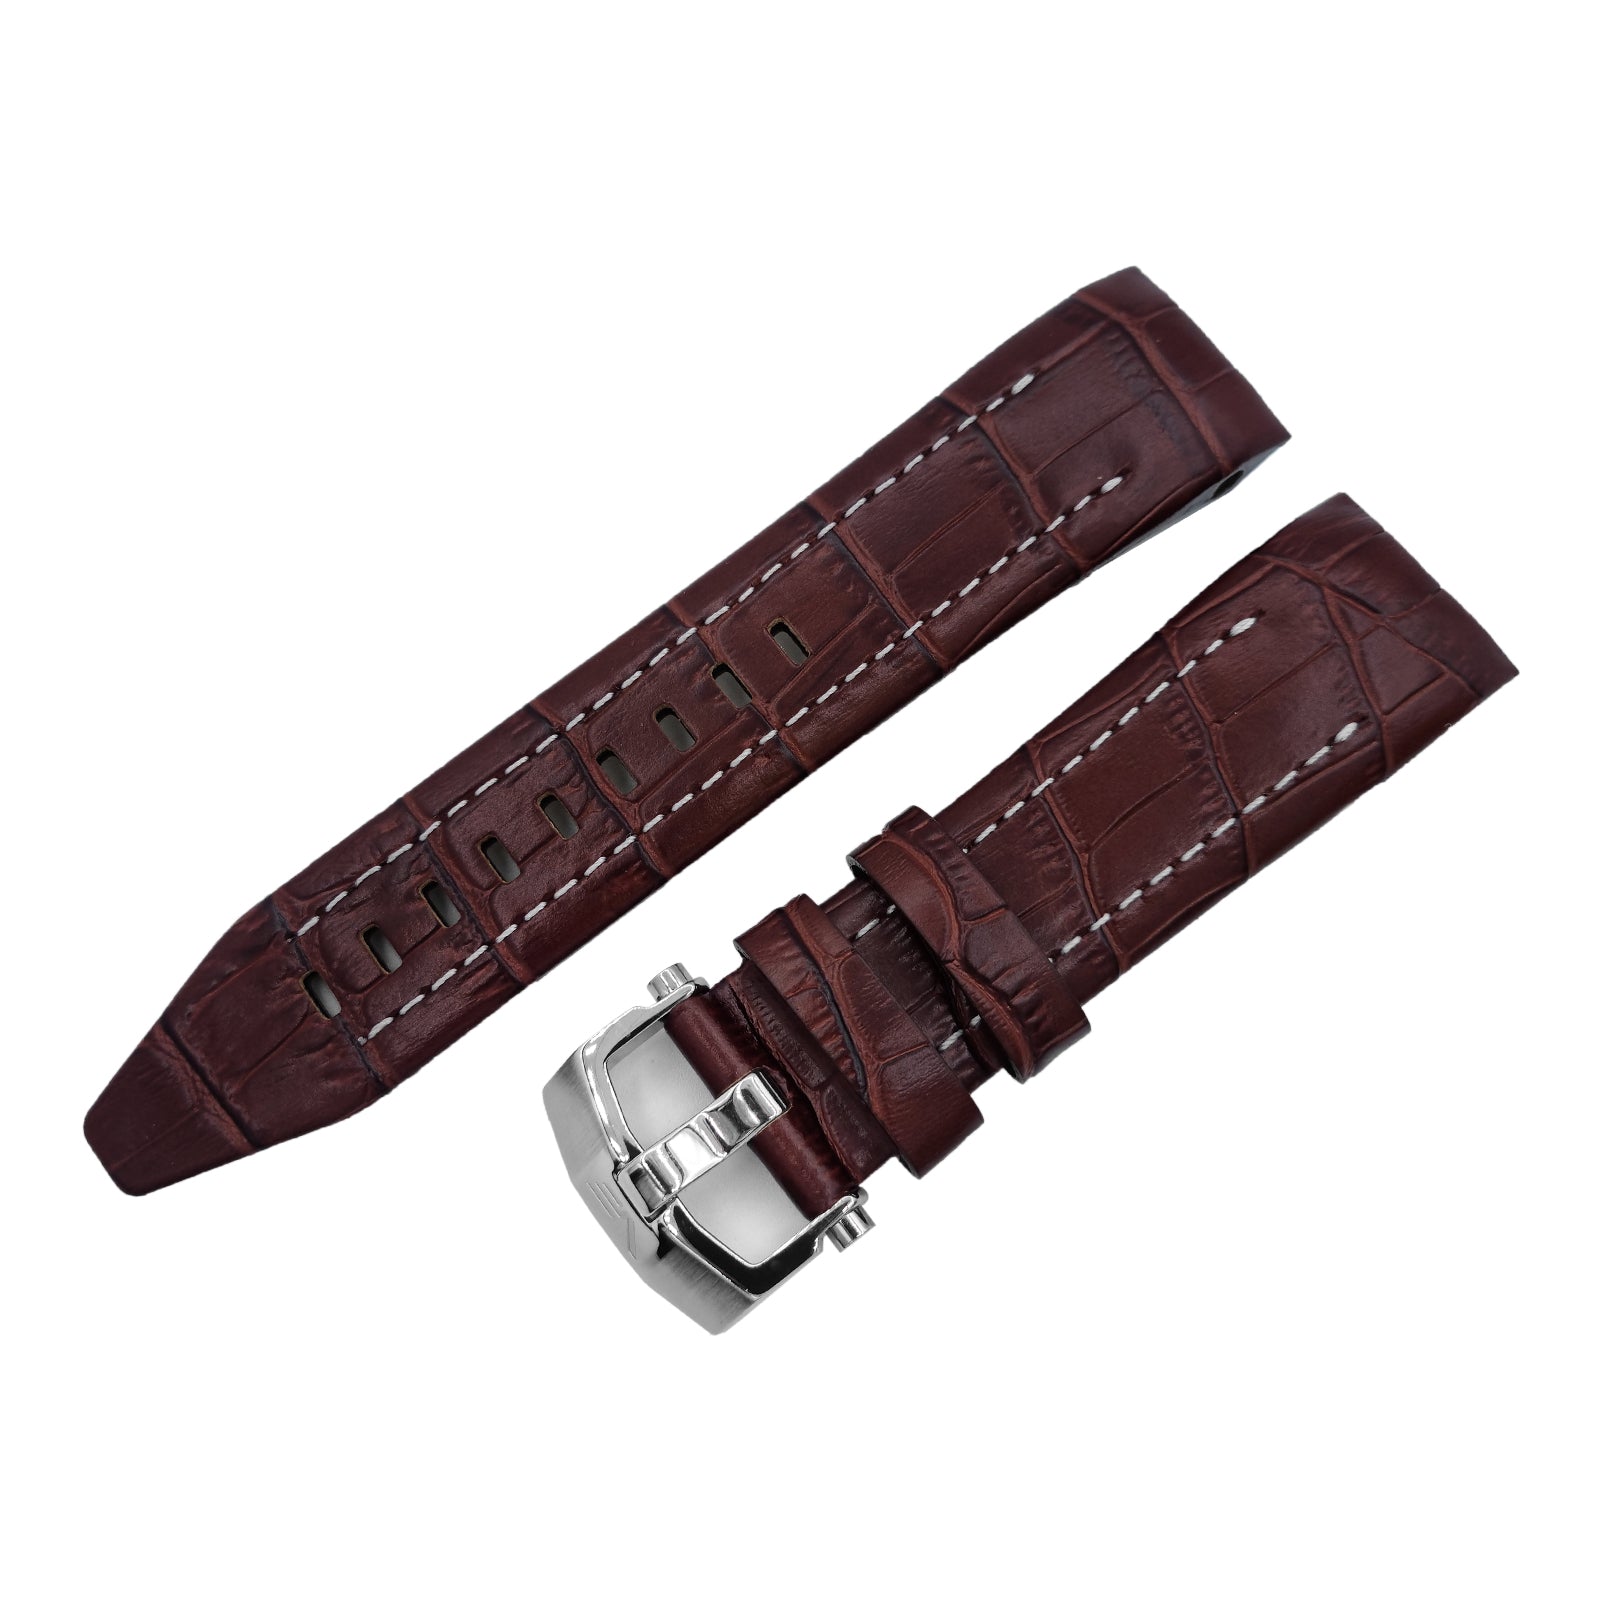 LUNOKHOD BROWN & WHITE LEATHER STRAP 25MM - POLISHED BUCKLE